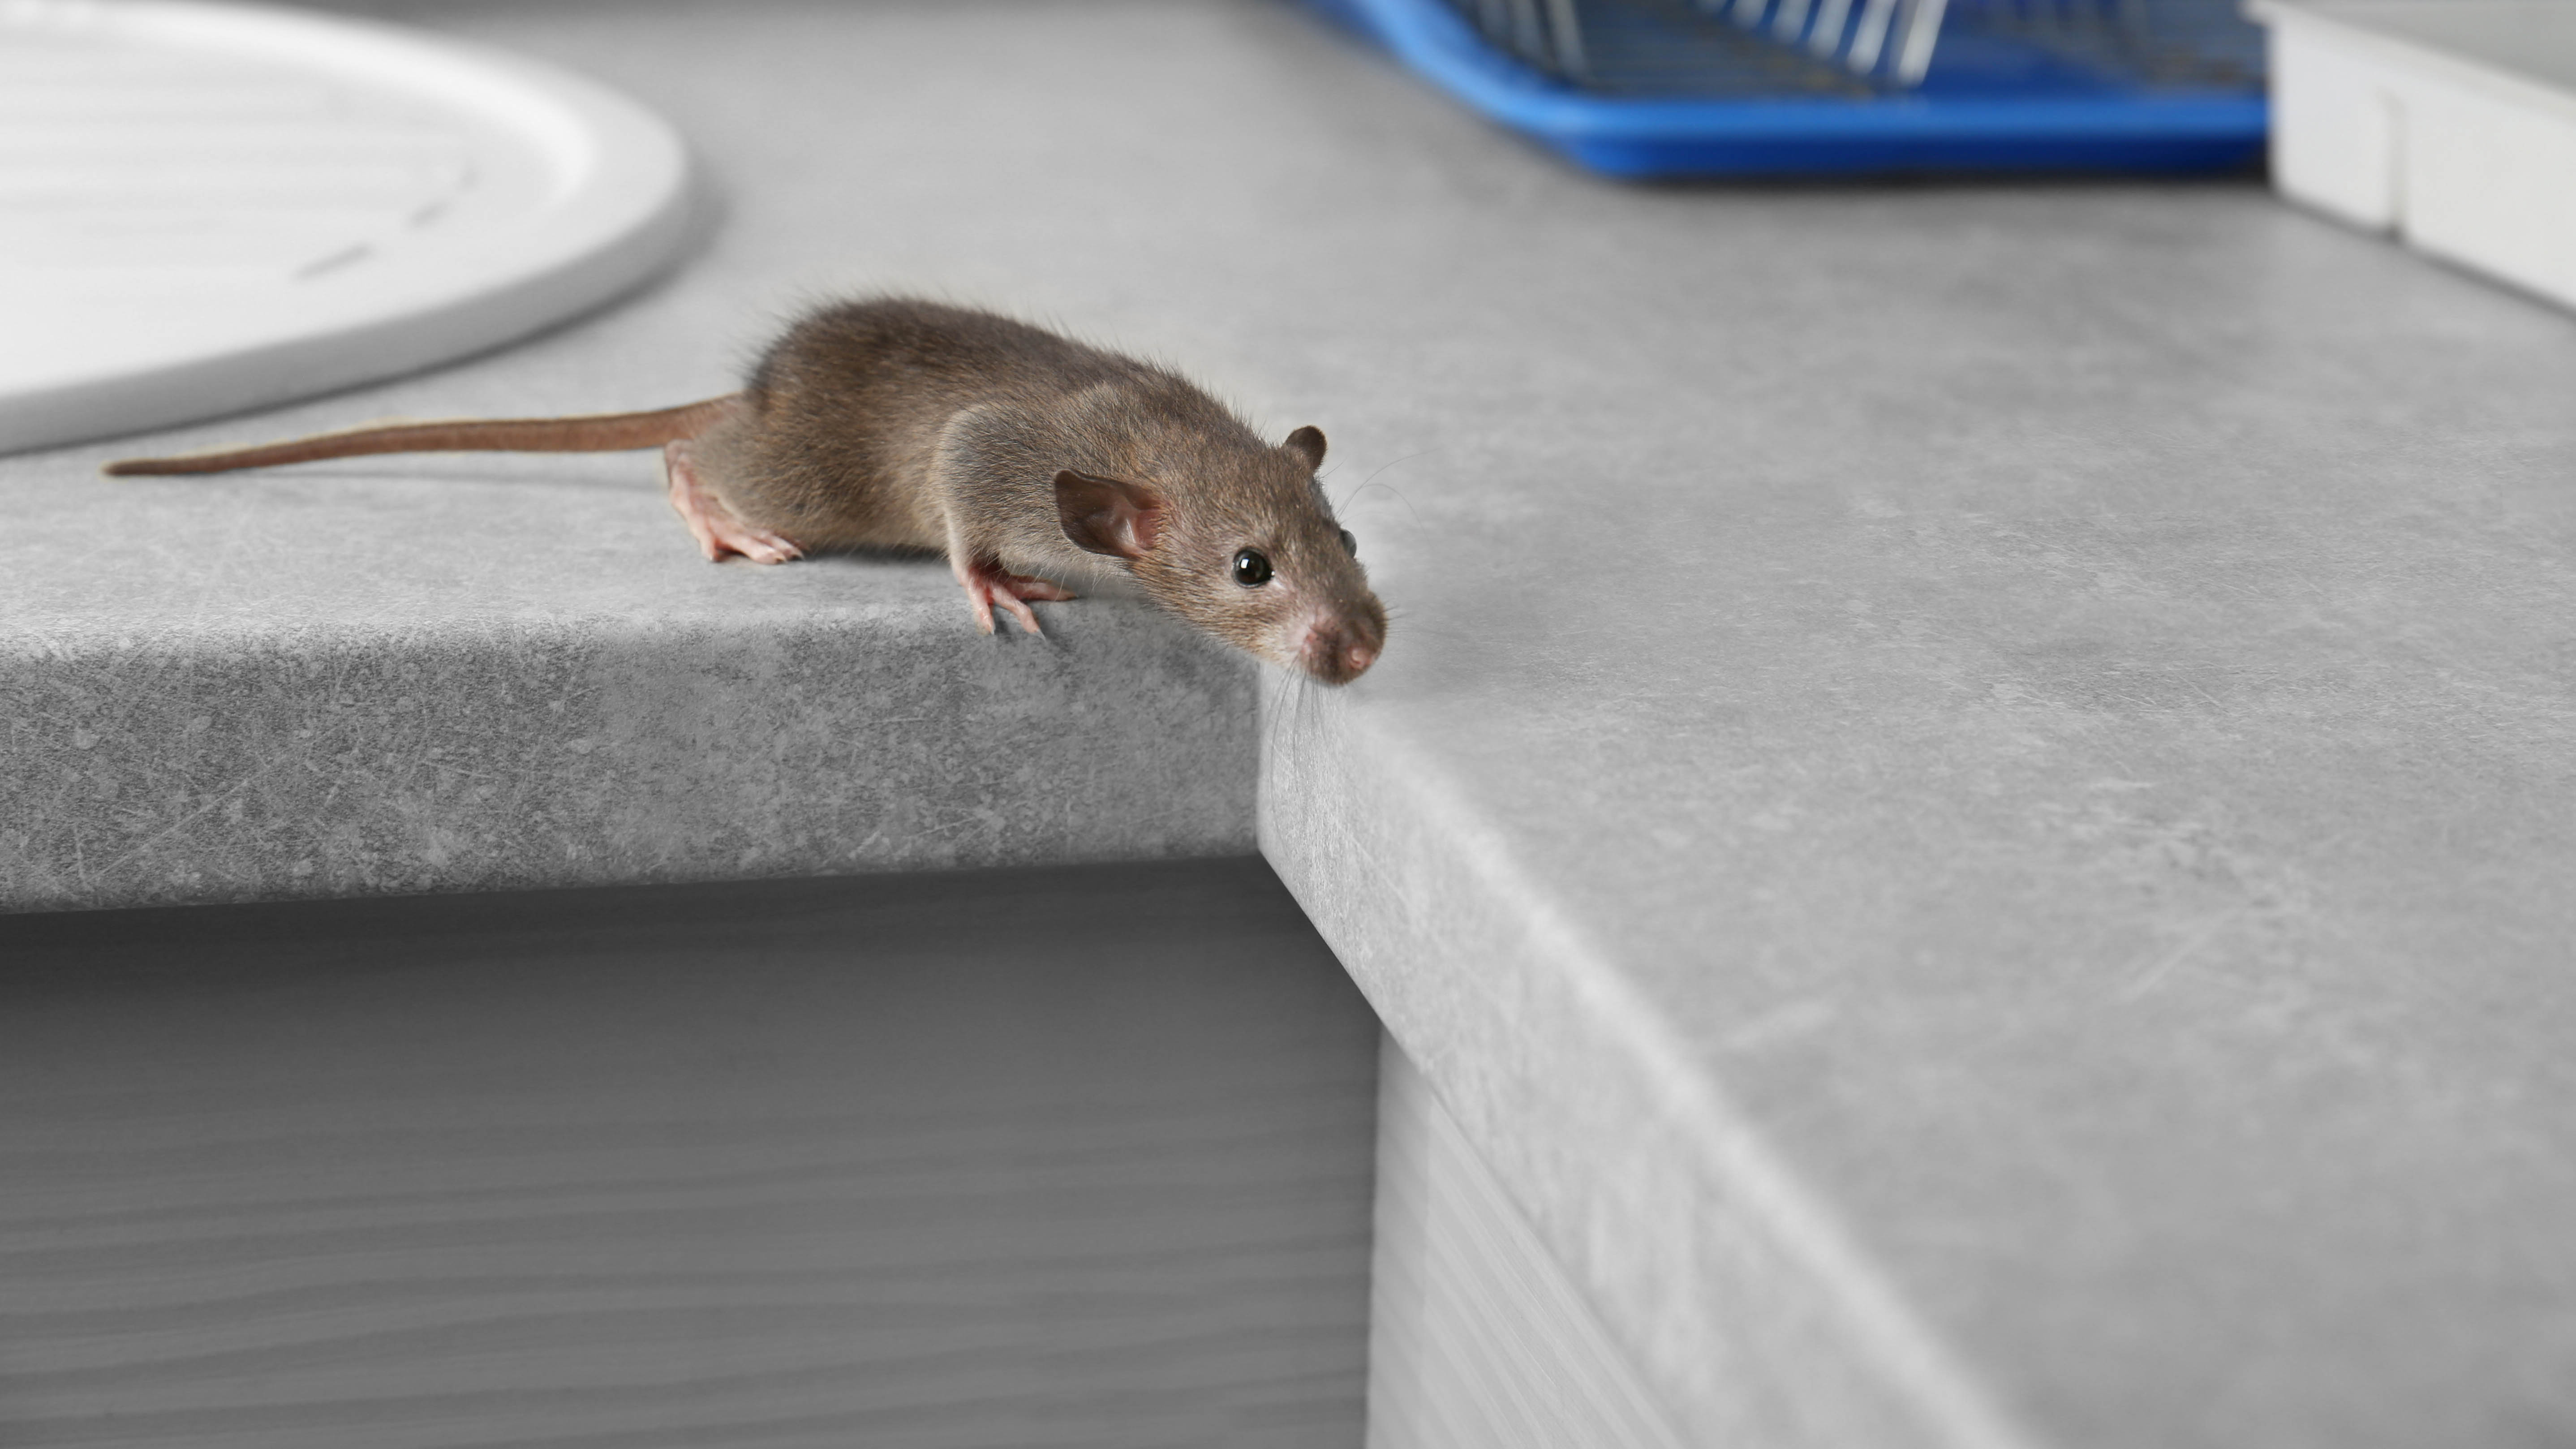 How to Get Rid of Mice Naturally: Repellents, Humane Traps, and